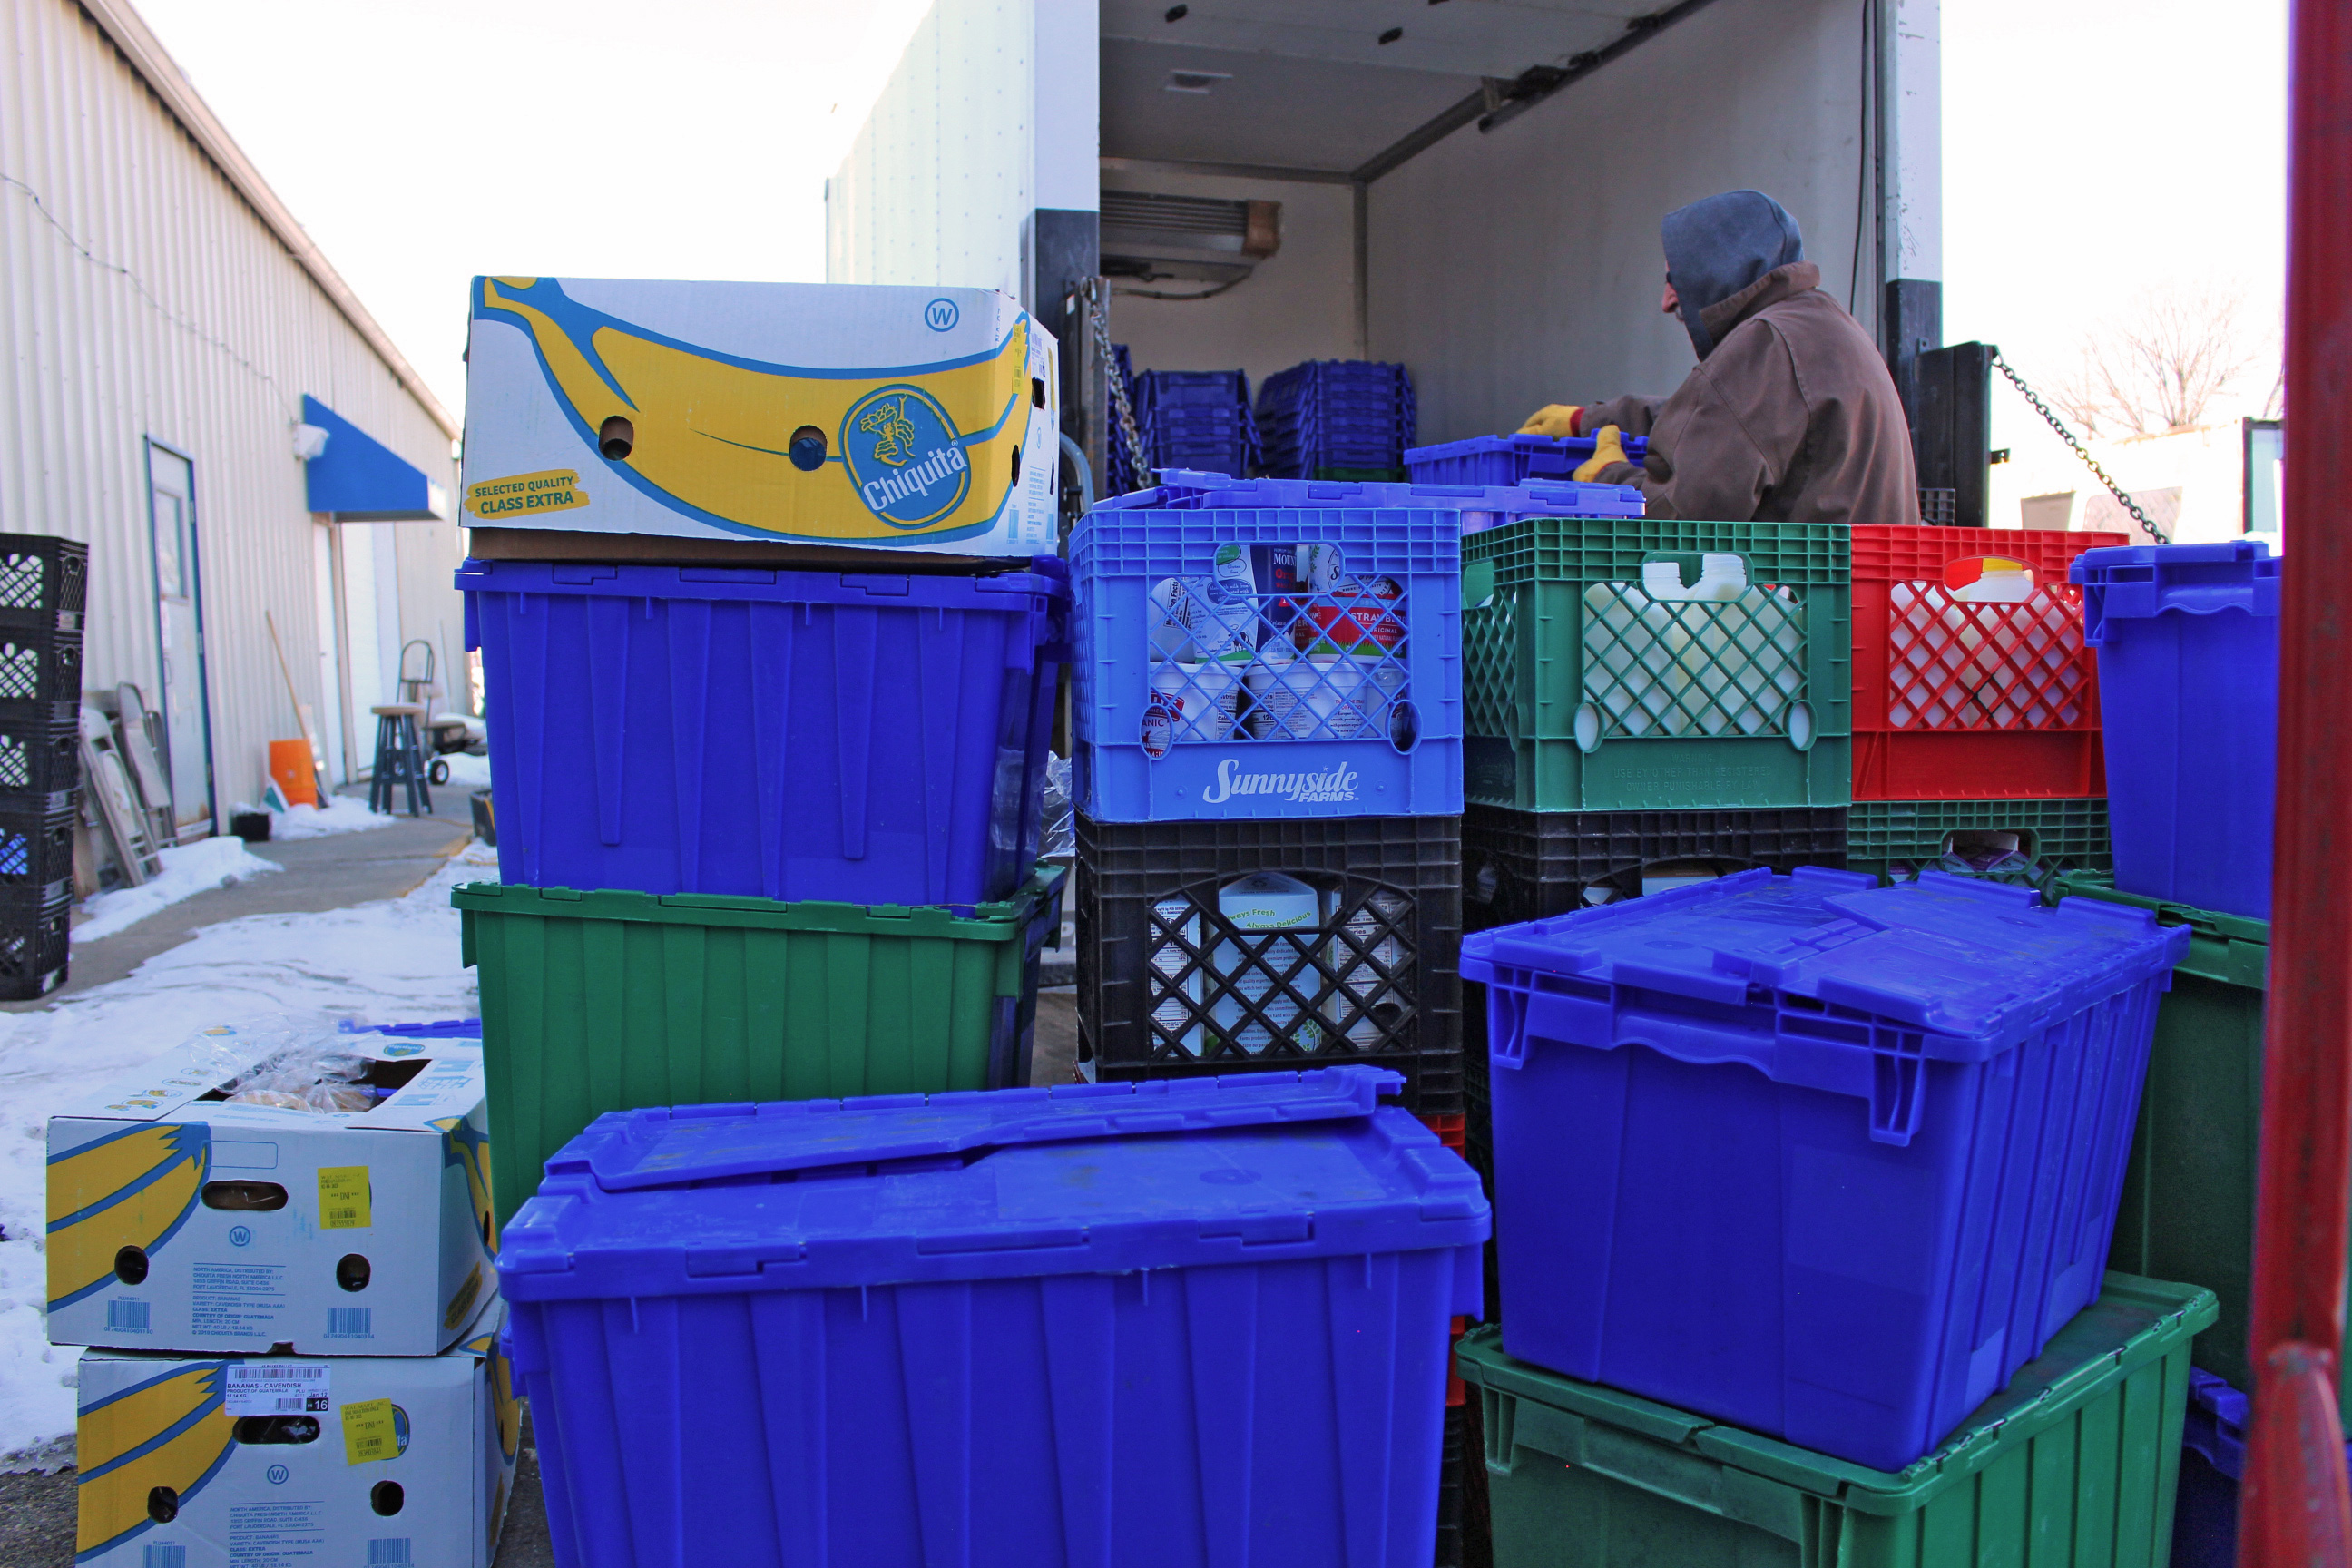 A photo shows crates of food from grocery stores being dropped off from a truck.